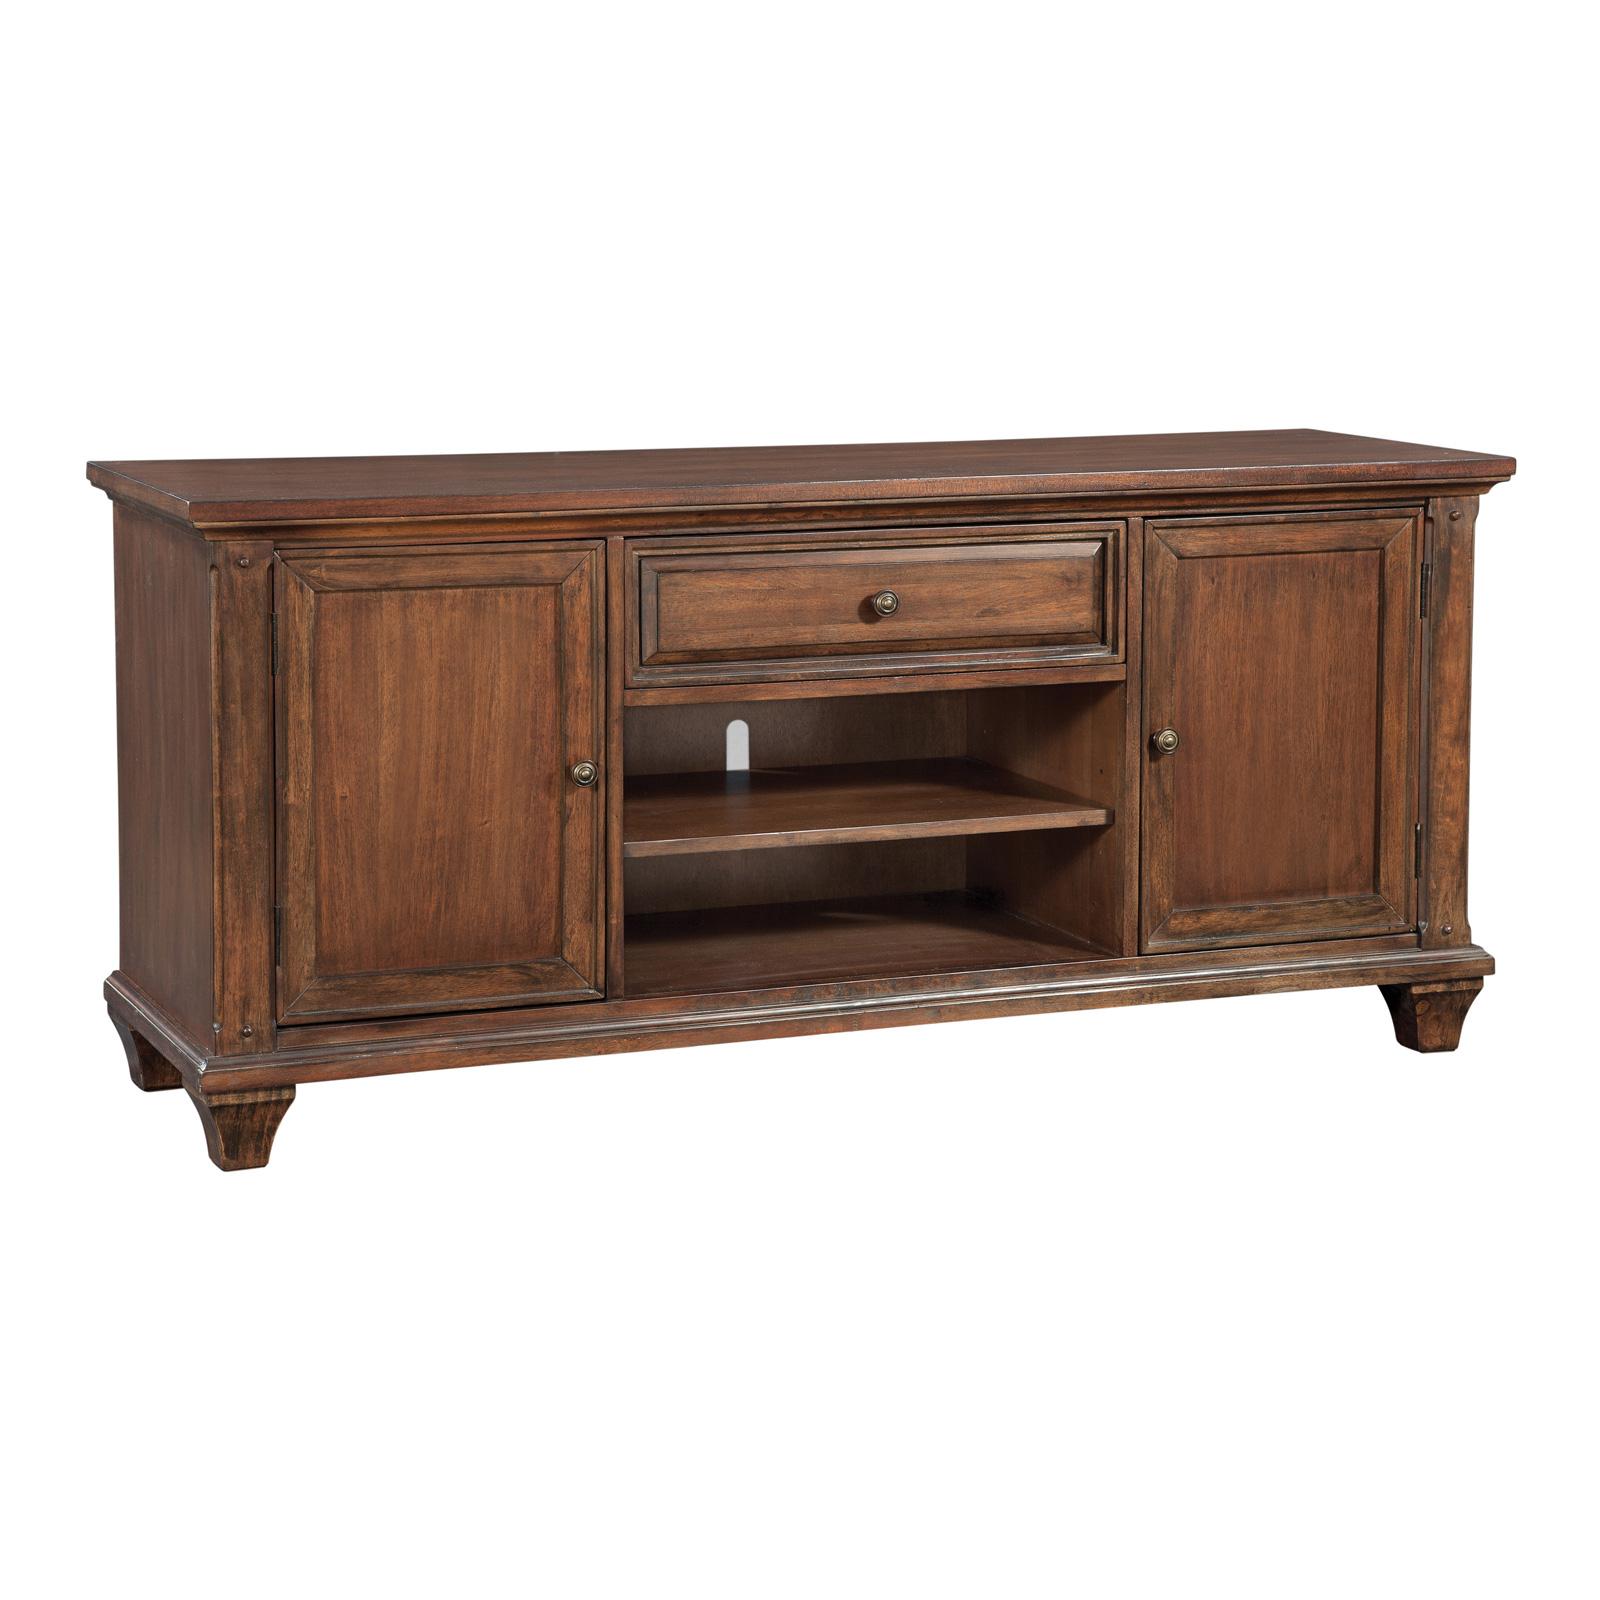 American Woodcrafters SEDONA 2400-212 Tv Console